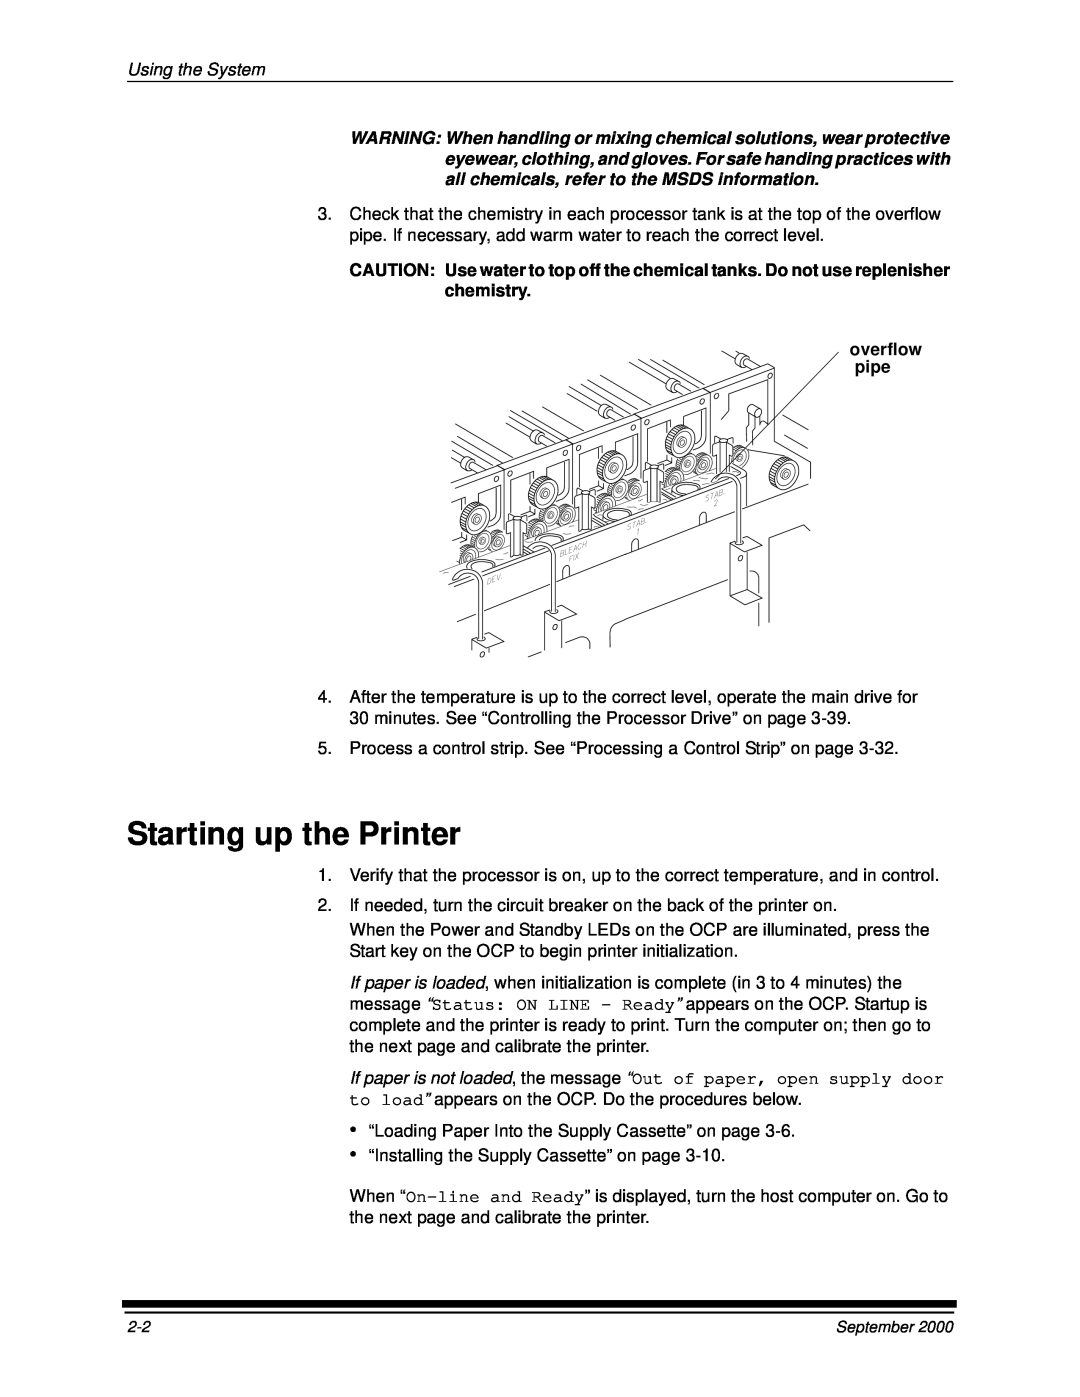 Kodak 20P manual Starting up the Printer, Using the System, overflow pipe 